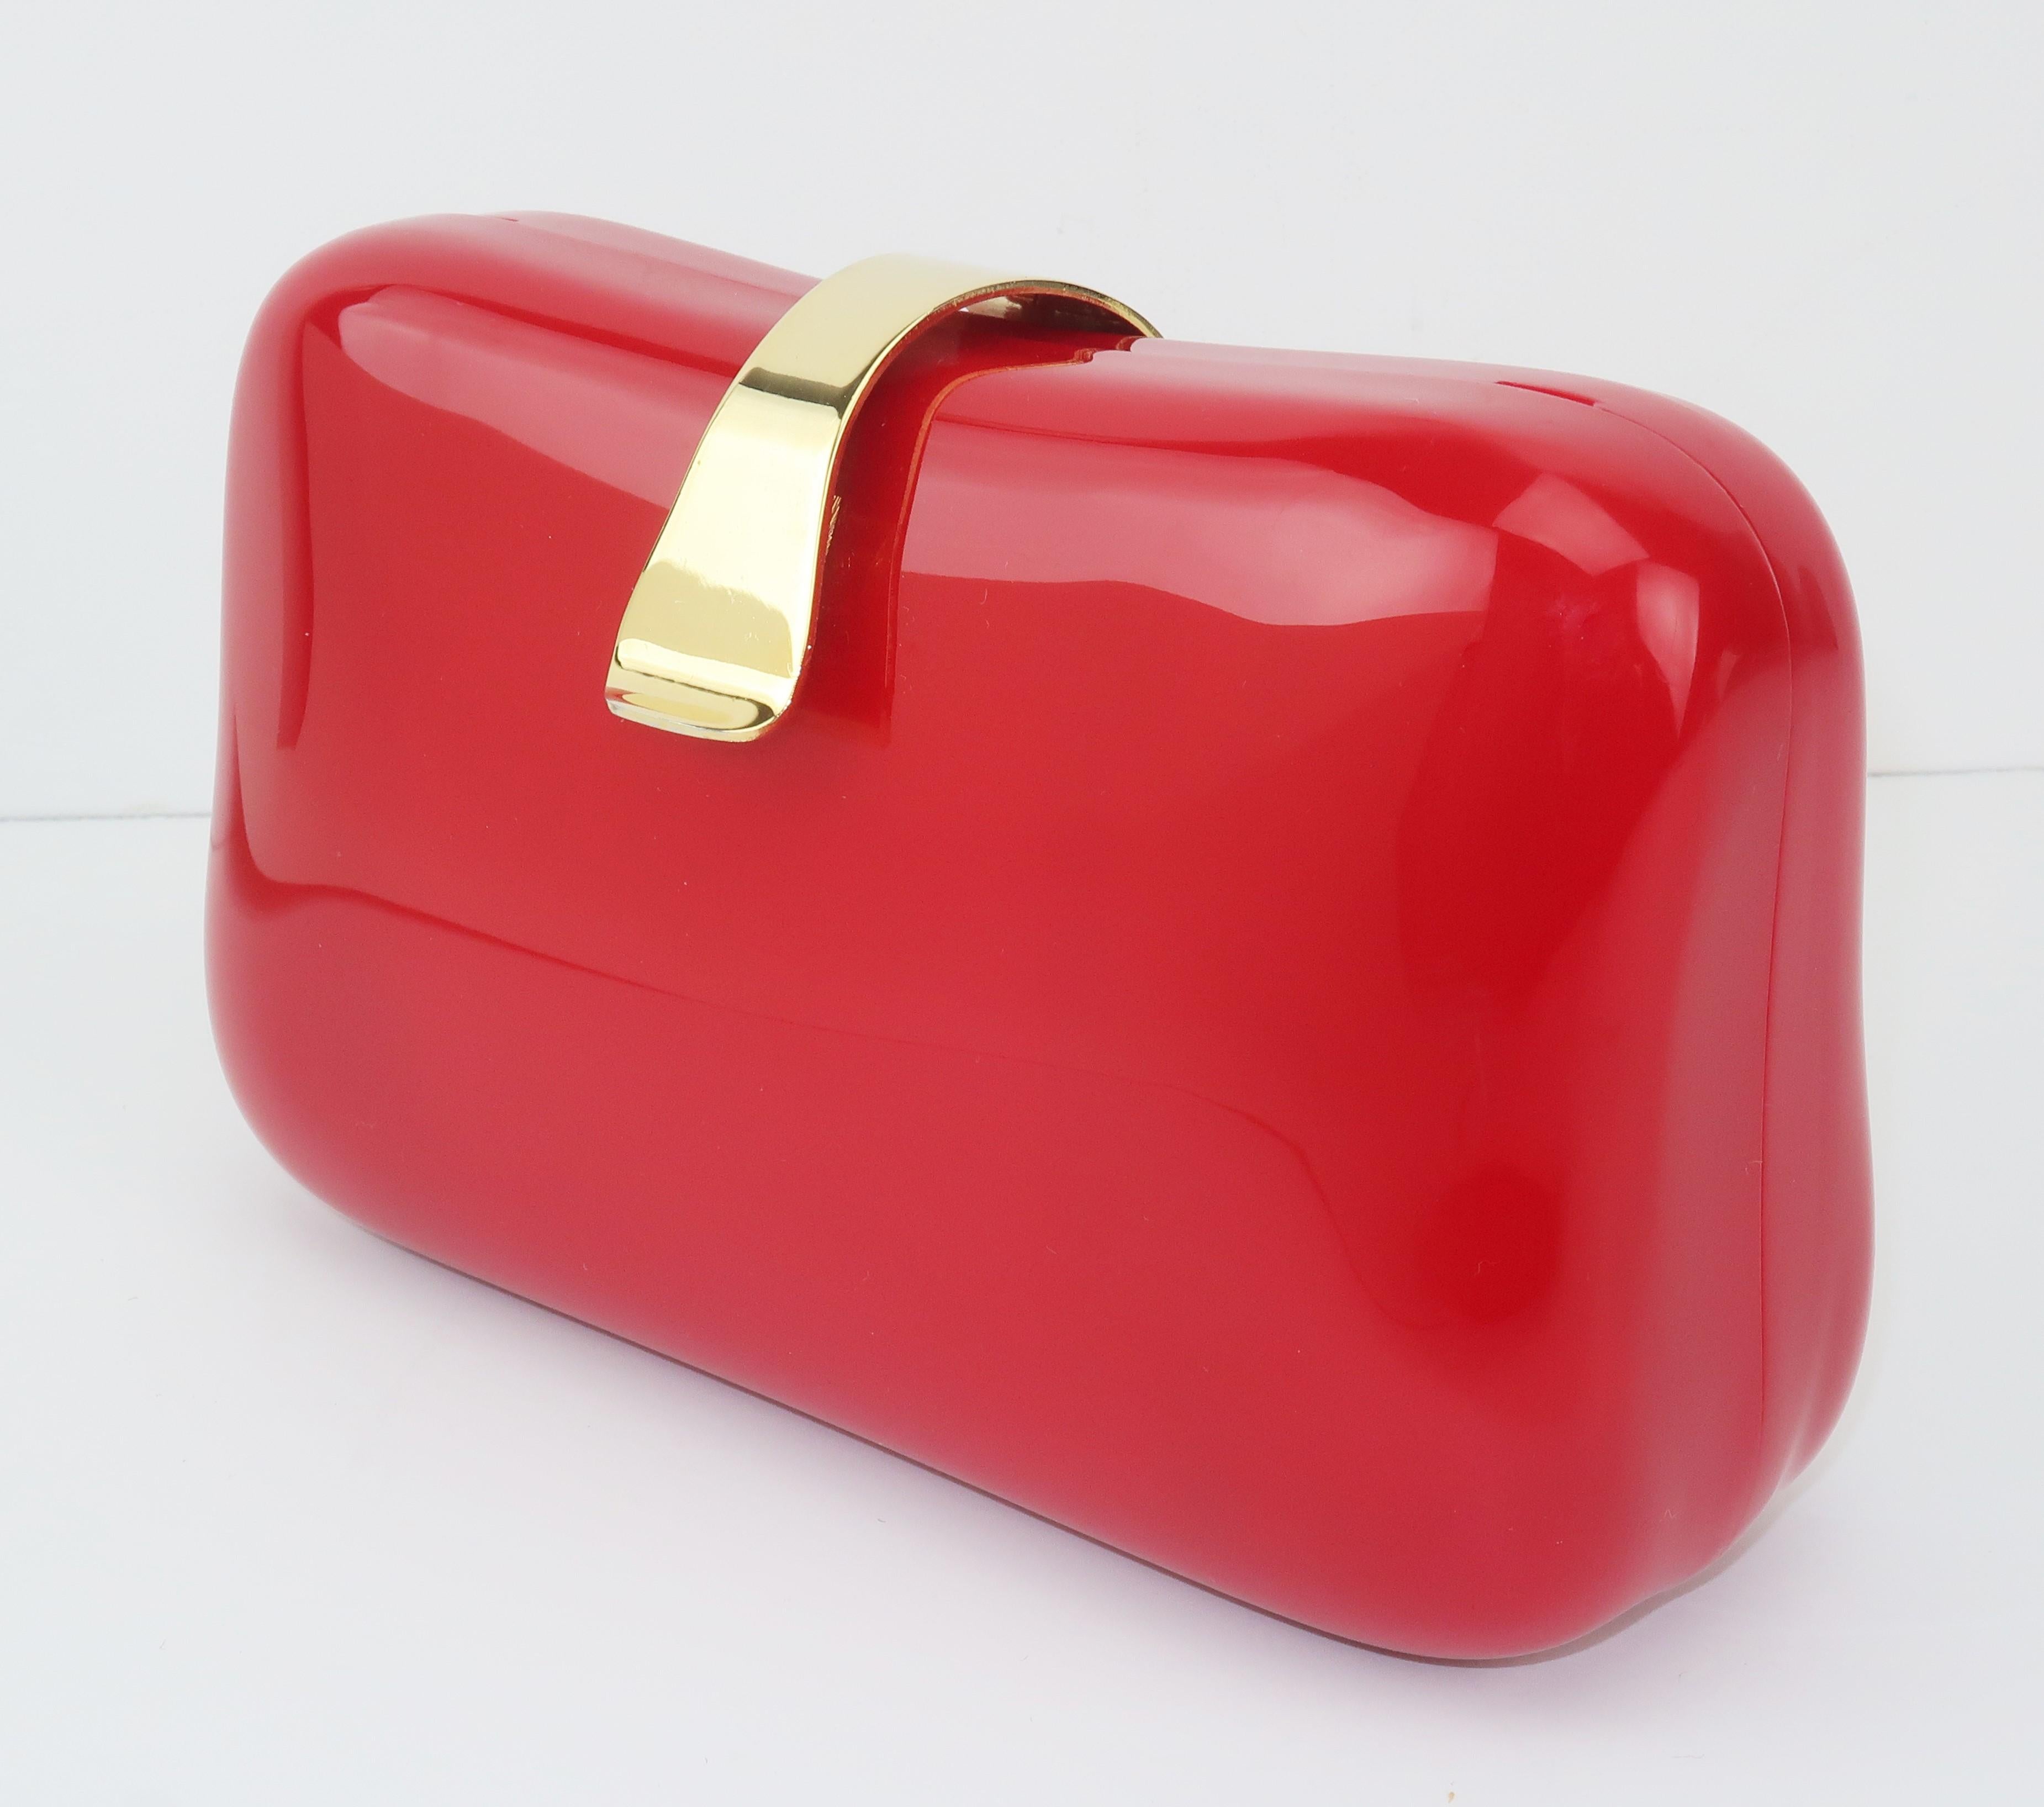 A 1980's lipstick red lucite handbag in a fun little box shape with a flip lock closure.  It sports a gold chain drop-in shoulder strap handle and features a red faille fabric lined interior with an open pocket.  As pretty to display as to carry! 